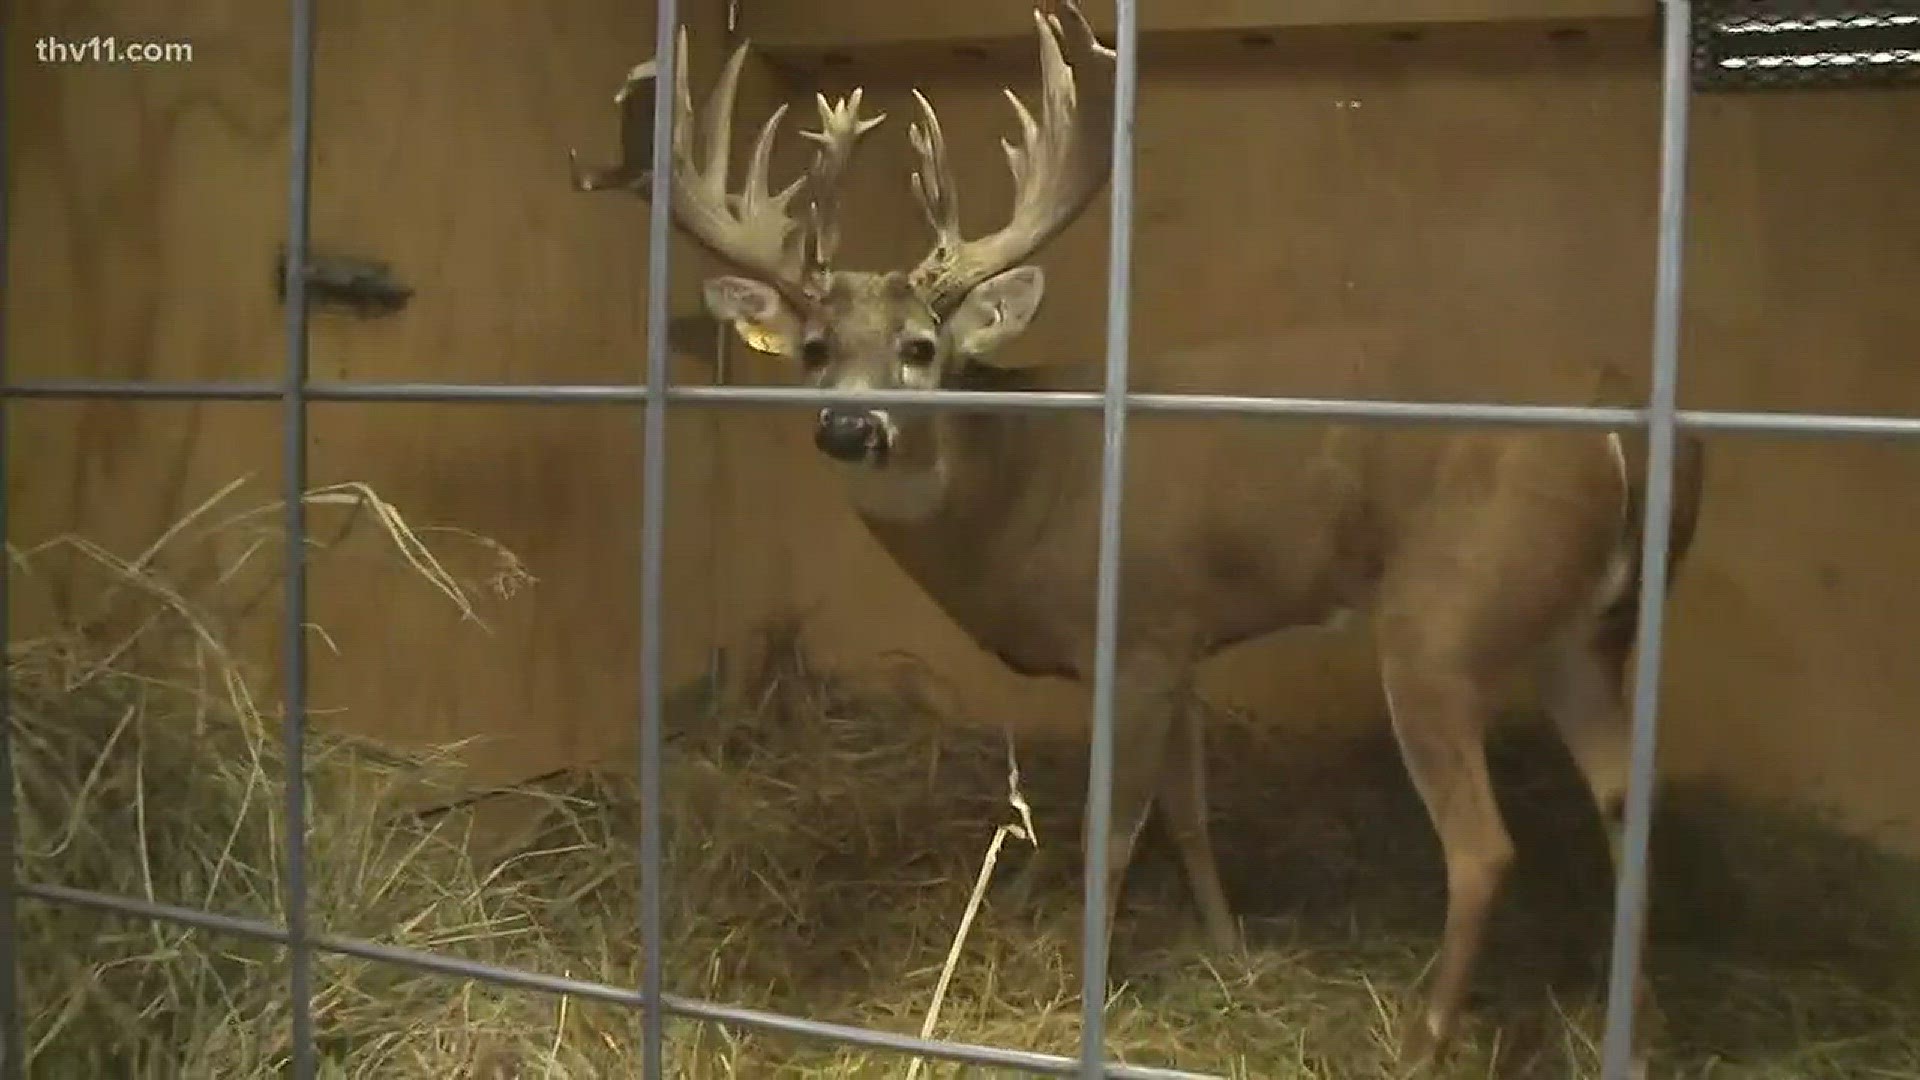 THV11's Raven Richard was live on Friday morning at the Arkansas State Fairgrounds previewing the Big Buck Classic